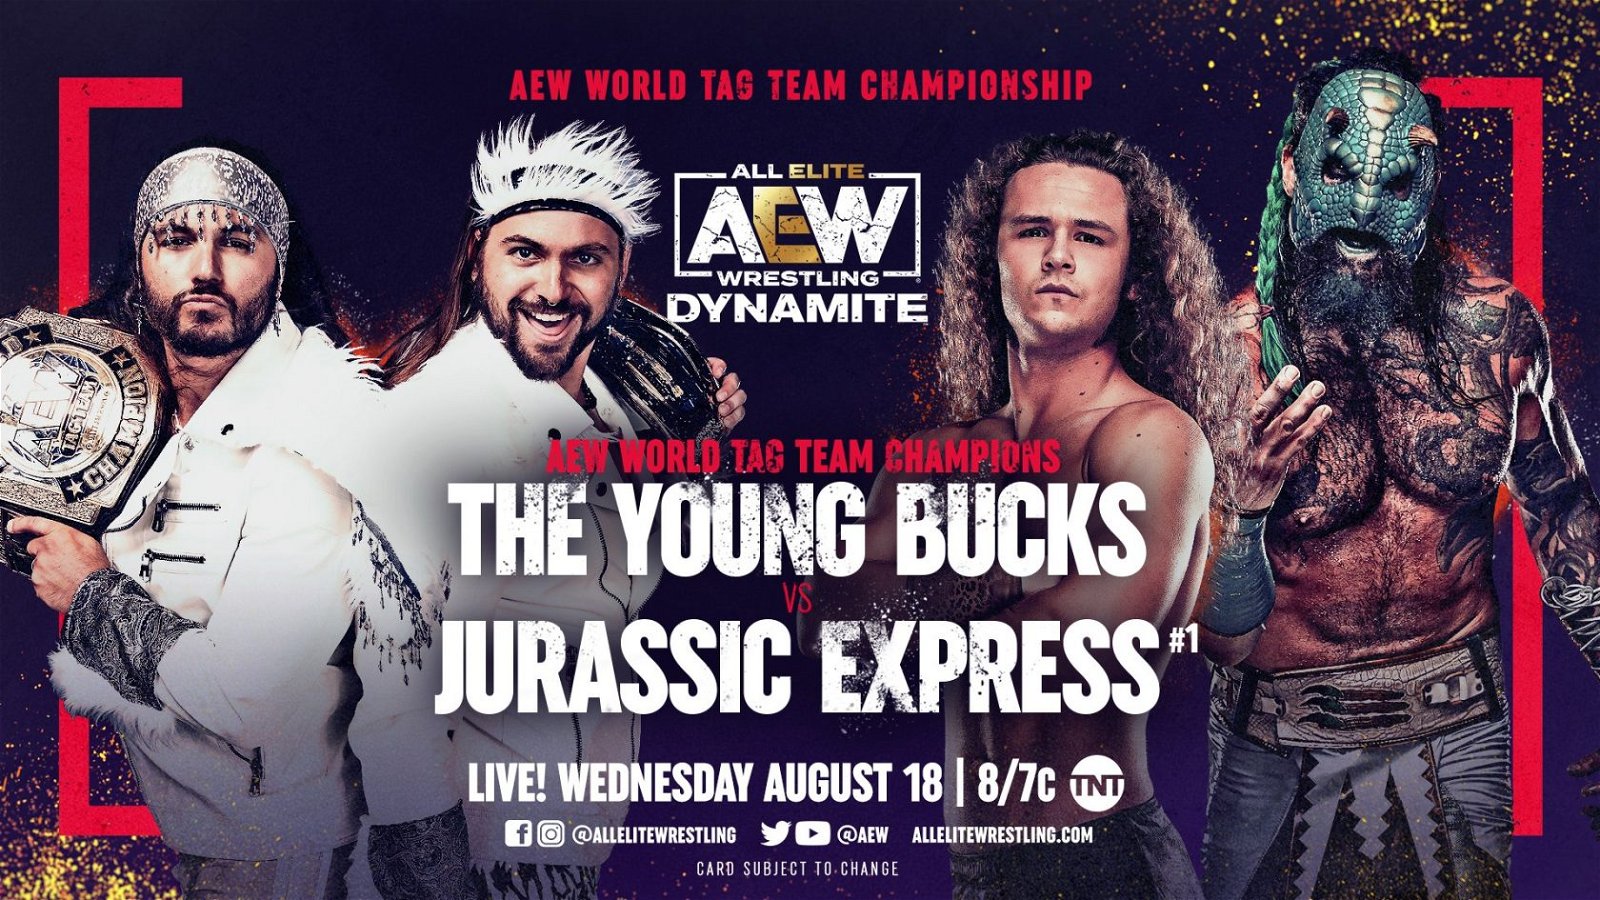 AEW Dynamite Live Results – August 18, 2021